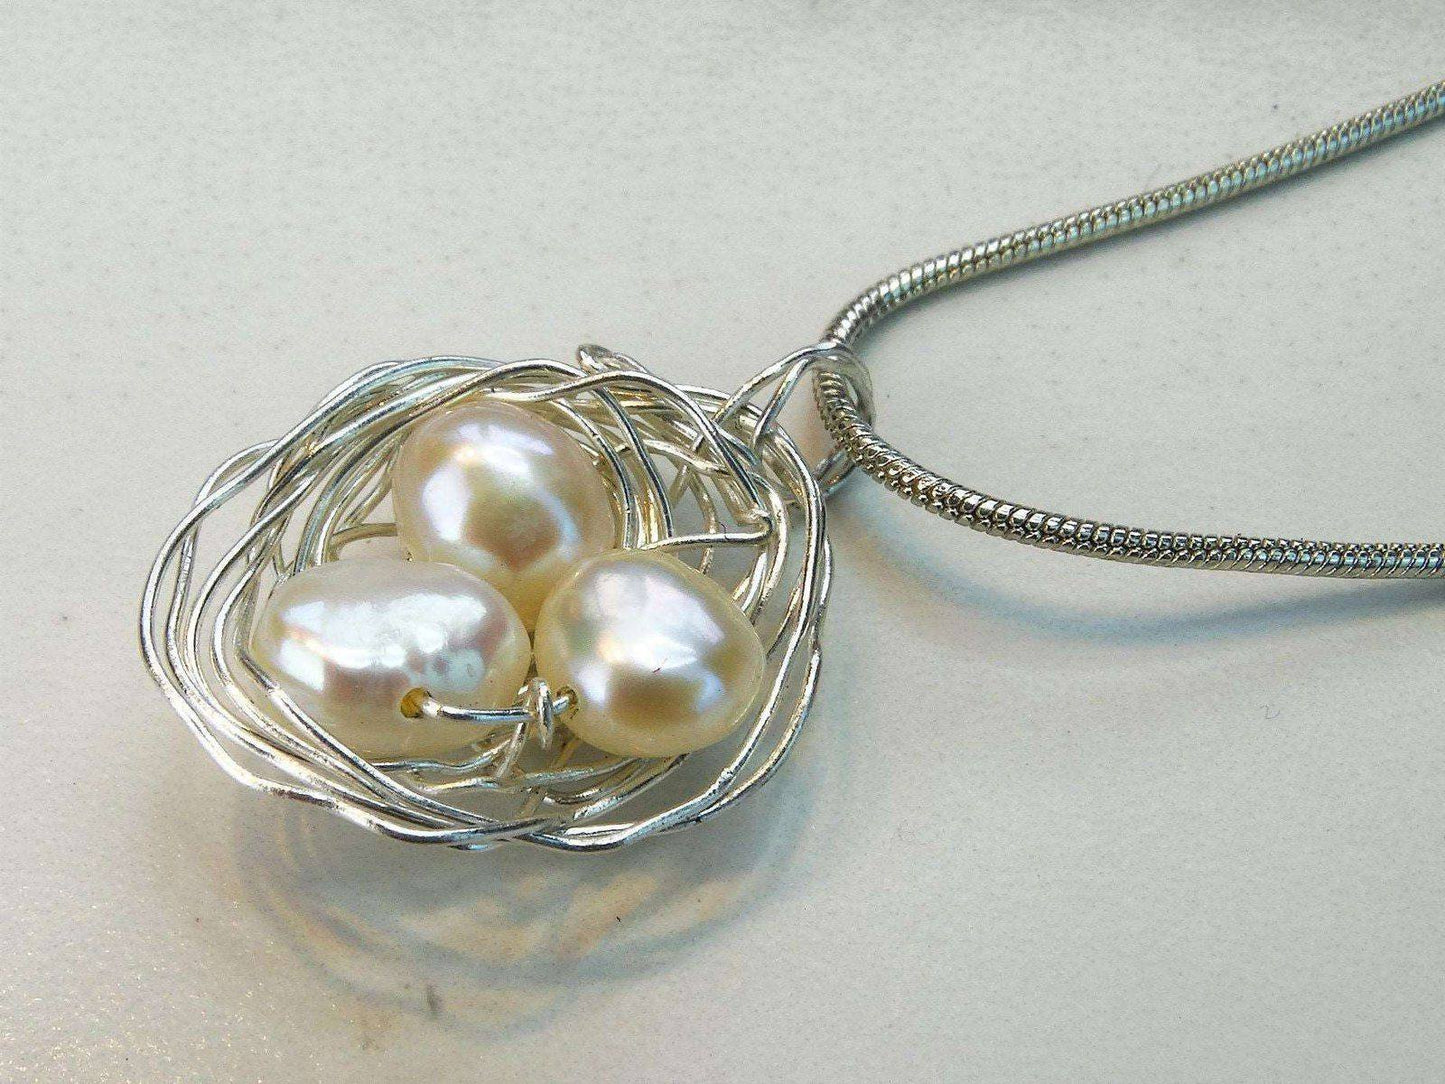 Birds nest pendant, necklace with white pearl eggs | Necklace | Louella Jewellery